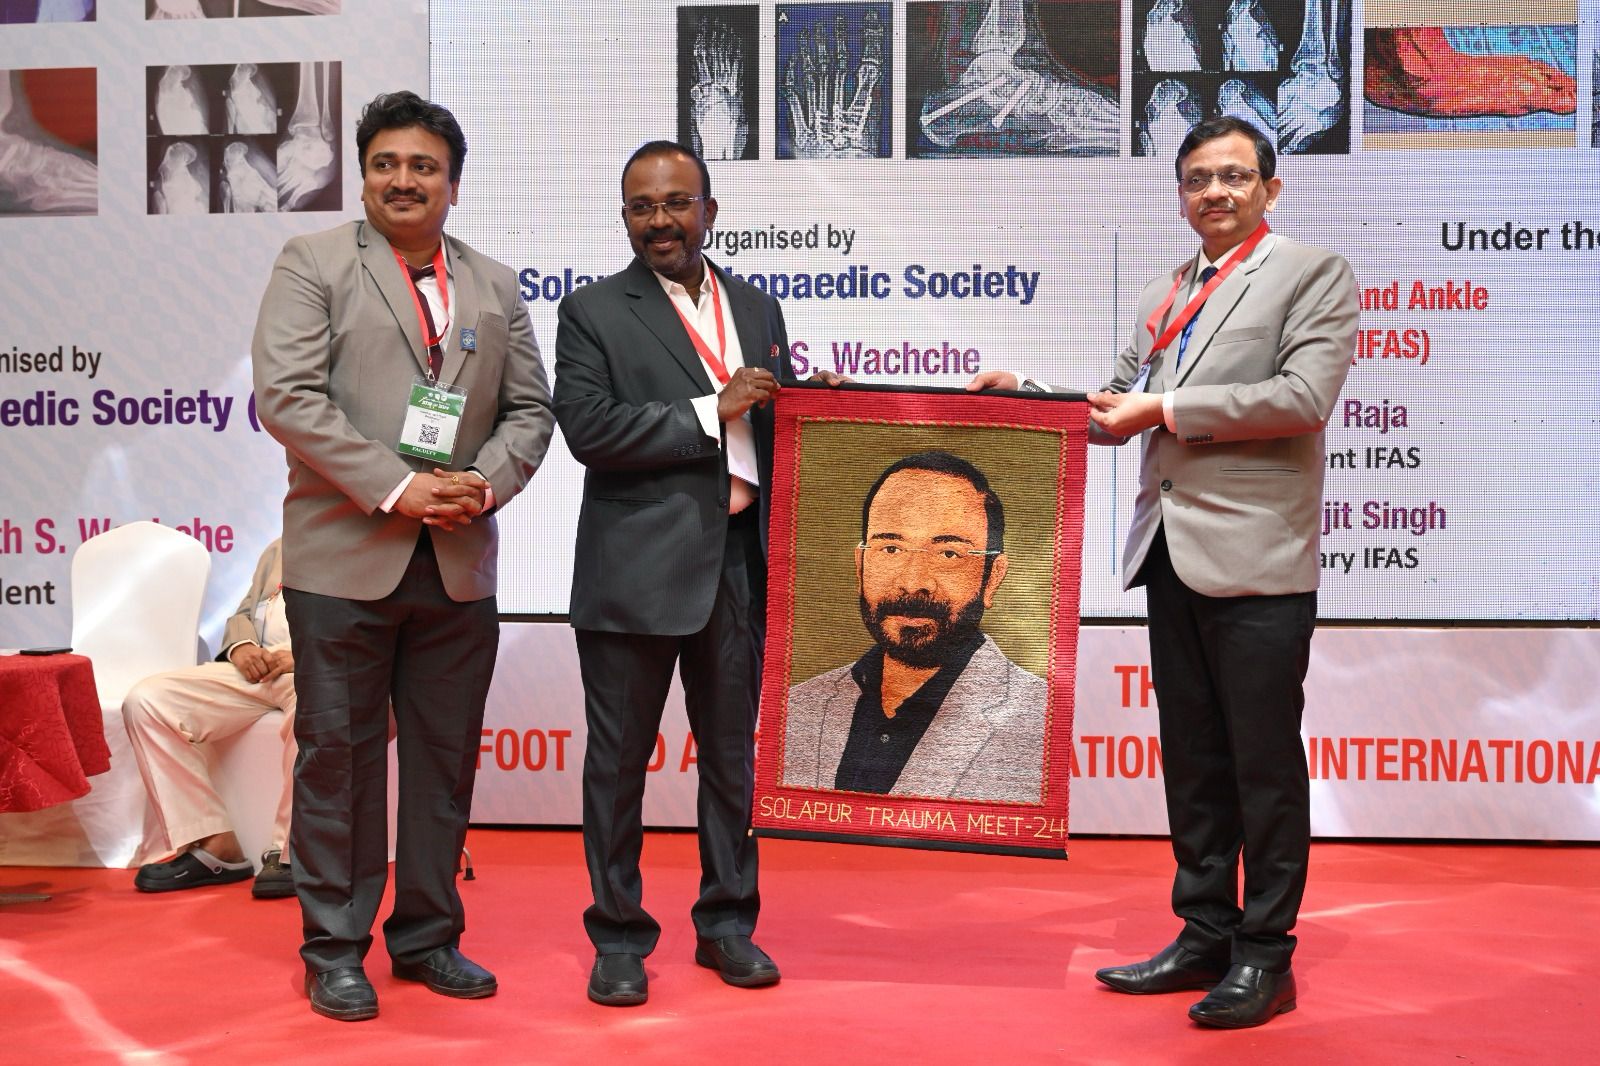 Indian Foot and Ankle Society - Trauma Meet - SOS-IFAS